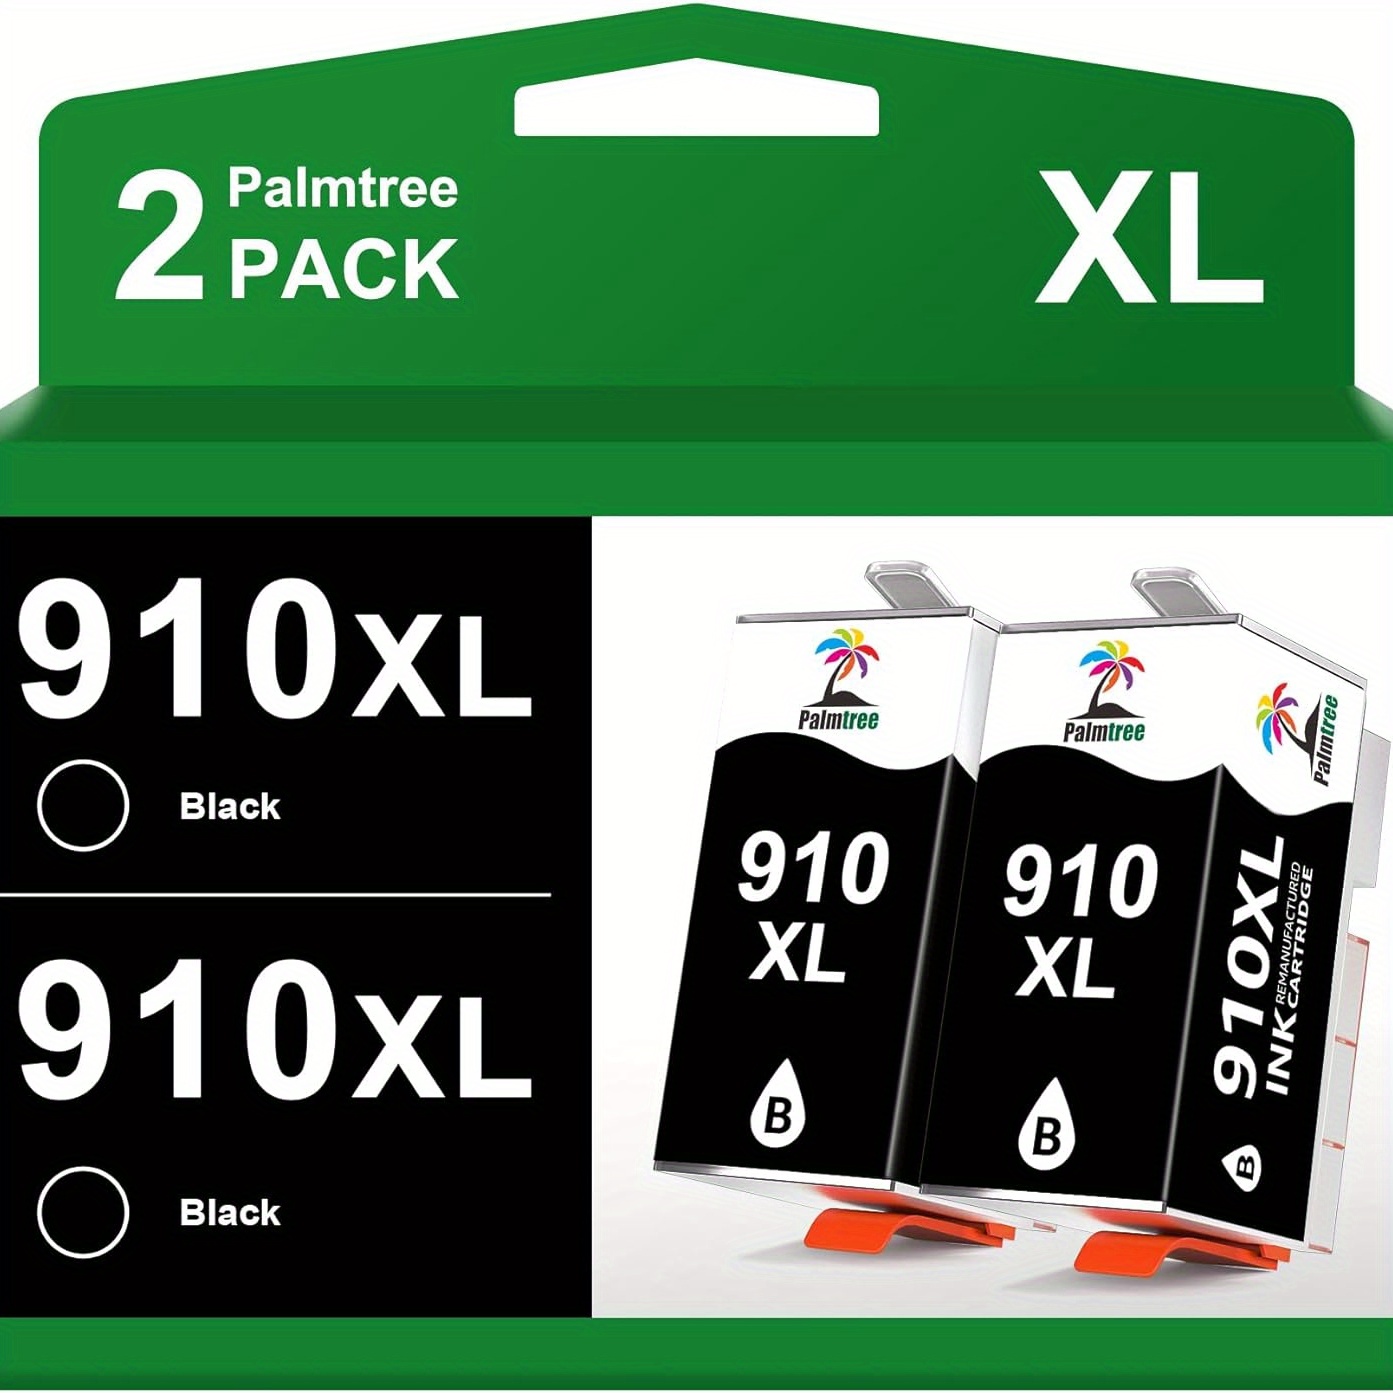 

2-pack 910 Xl Black Ink Cartridges For Printers For 910xl Black Ink Cartridges Compatible With Officejet Pro 8020 8025 8028 8035 Officejet 8015 8010 8018 8022 Printer (2 Black 910xl)